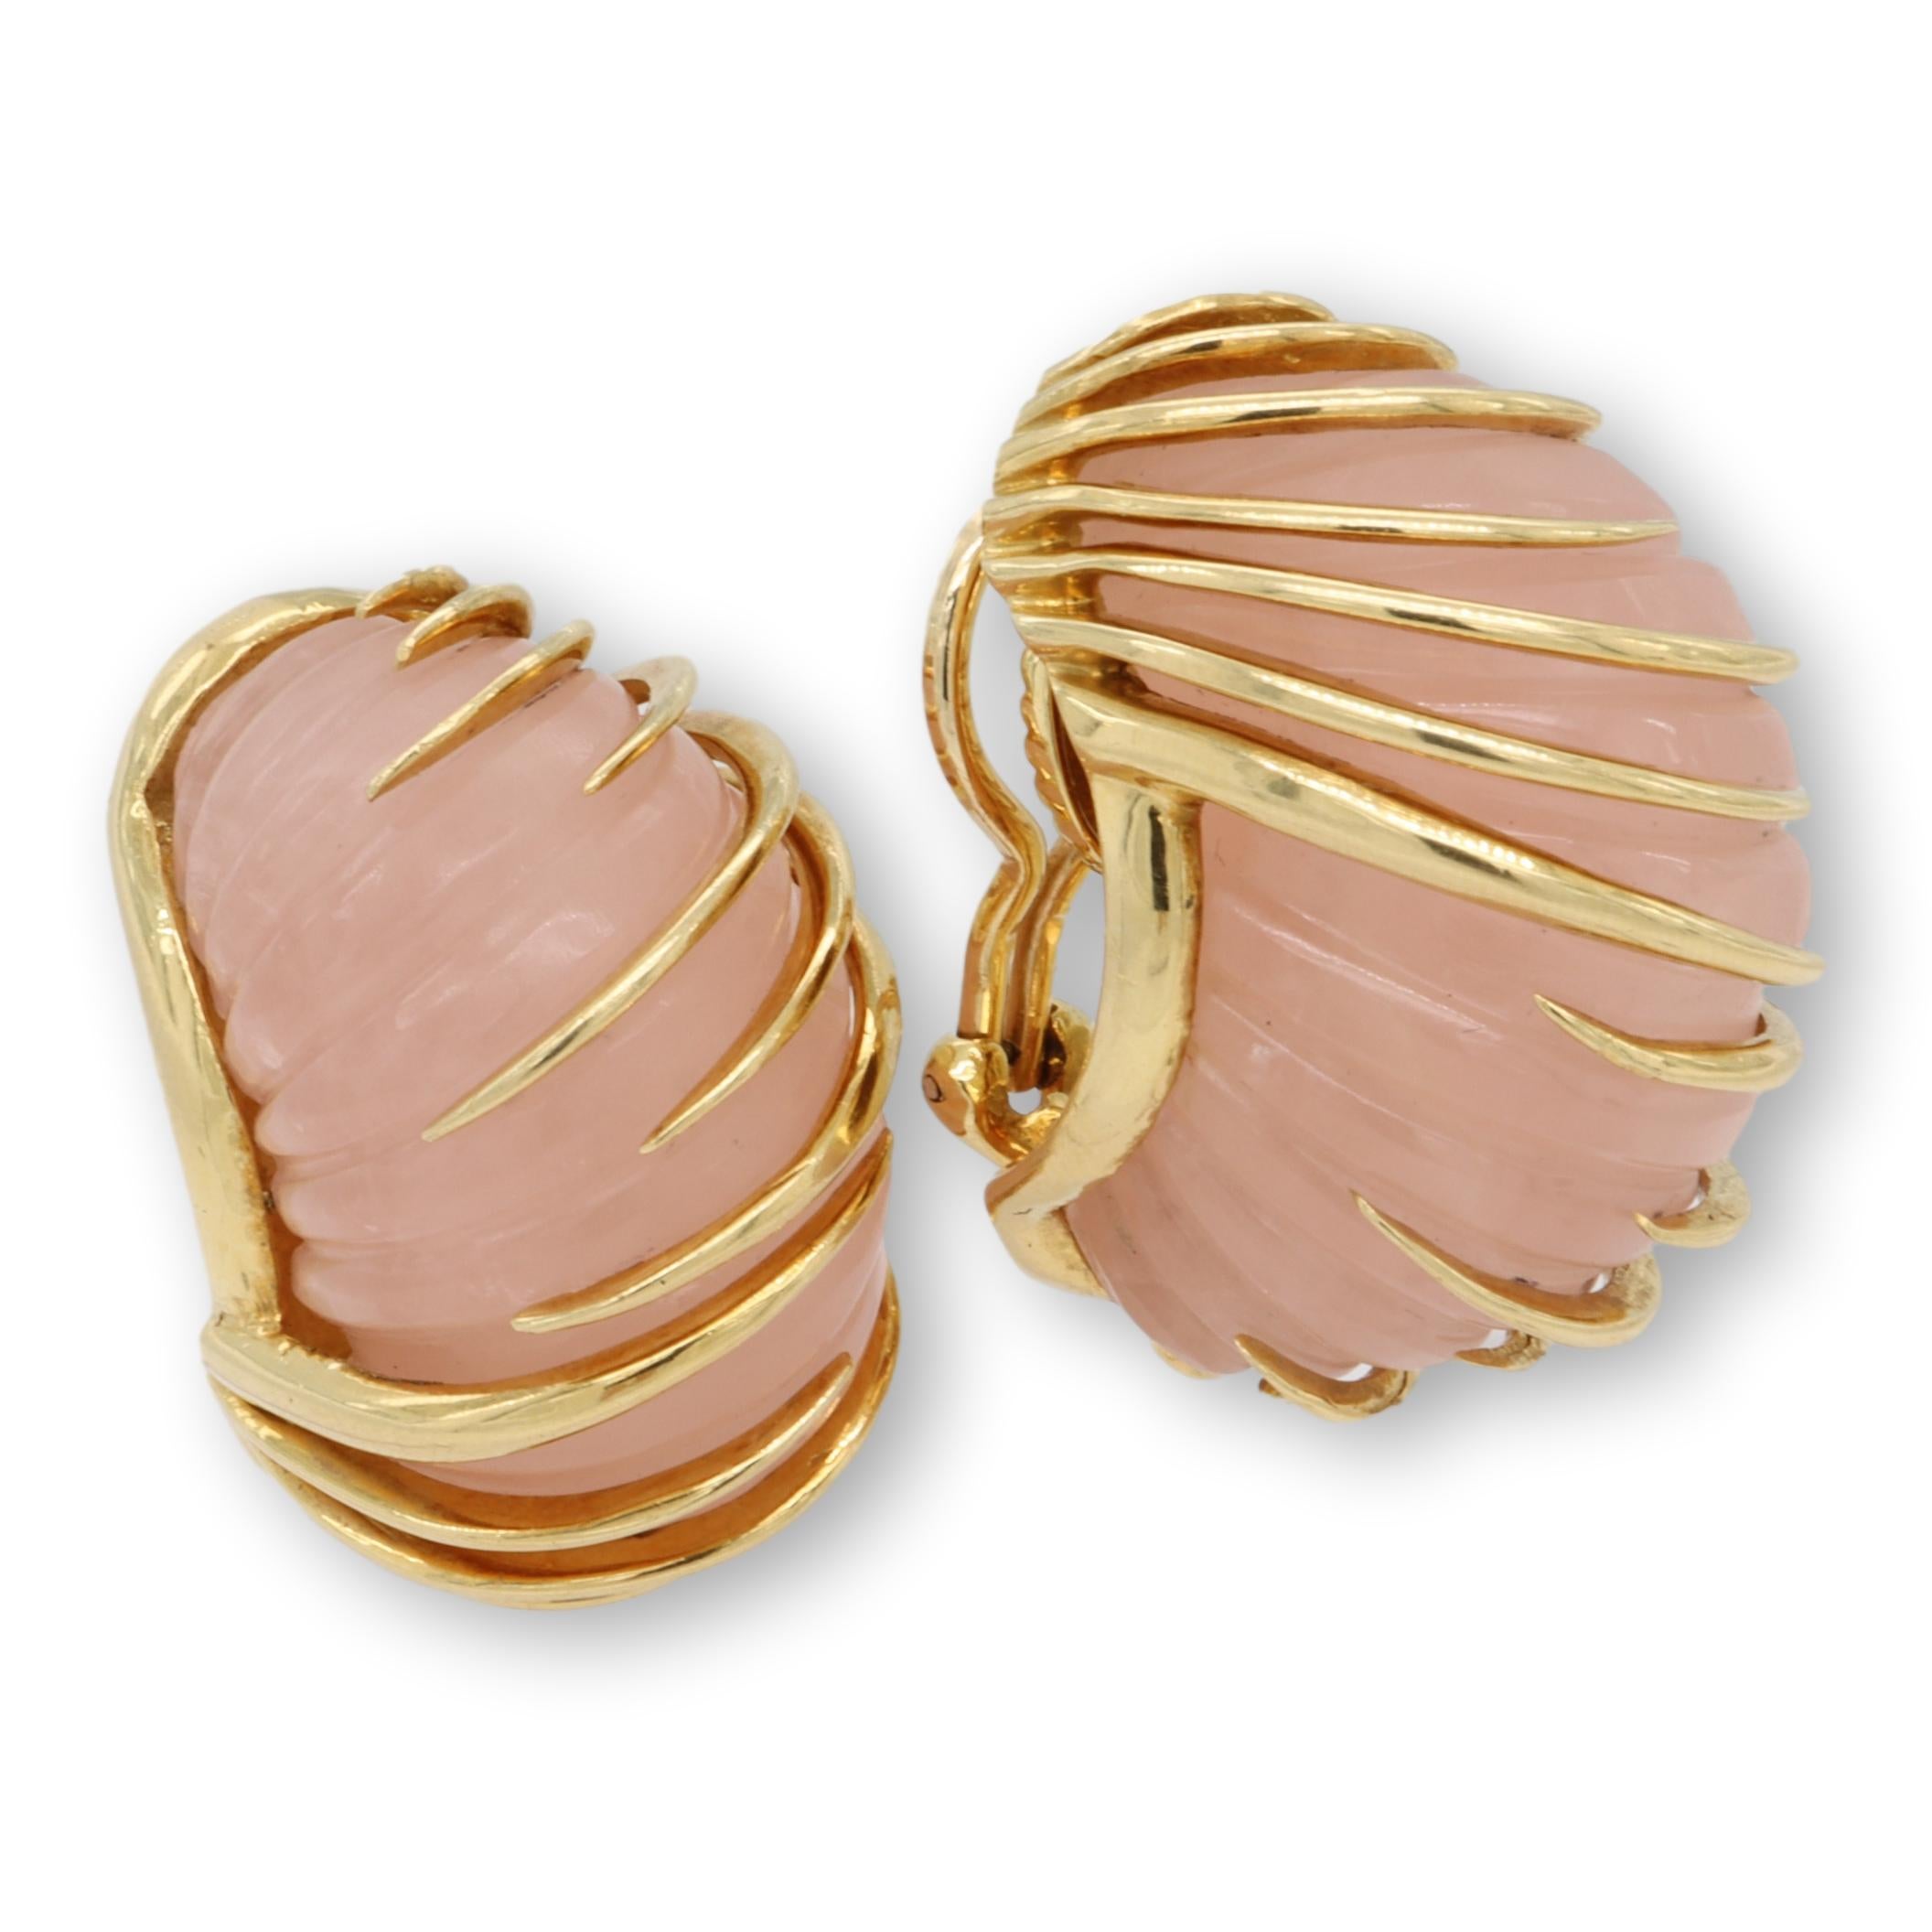 Van Cleef & Arpels Carved Rose Quartz Earrings in 18 Karat Yellow Gold In Good Condition For Sale In New York, NY